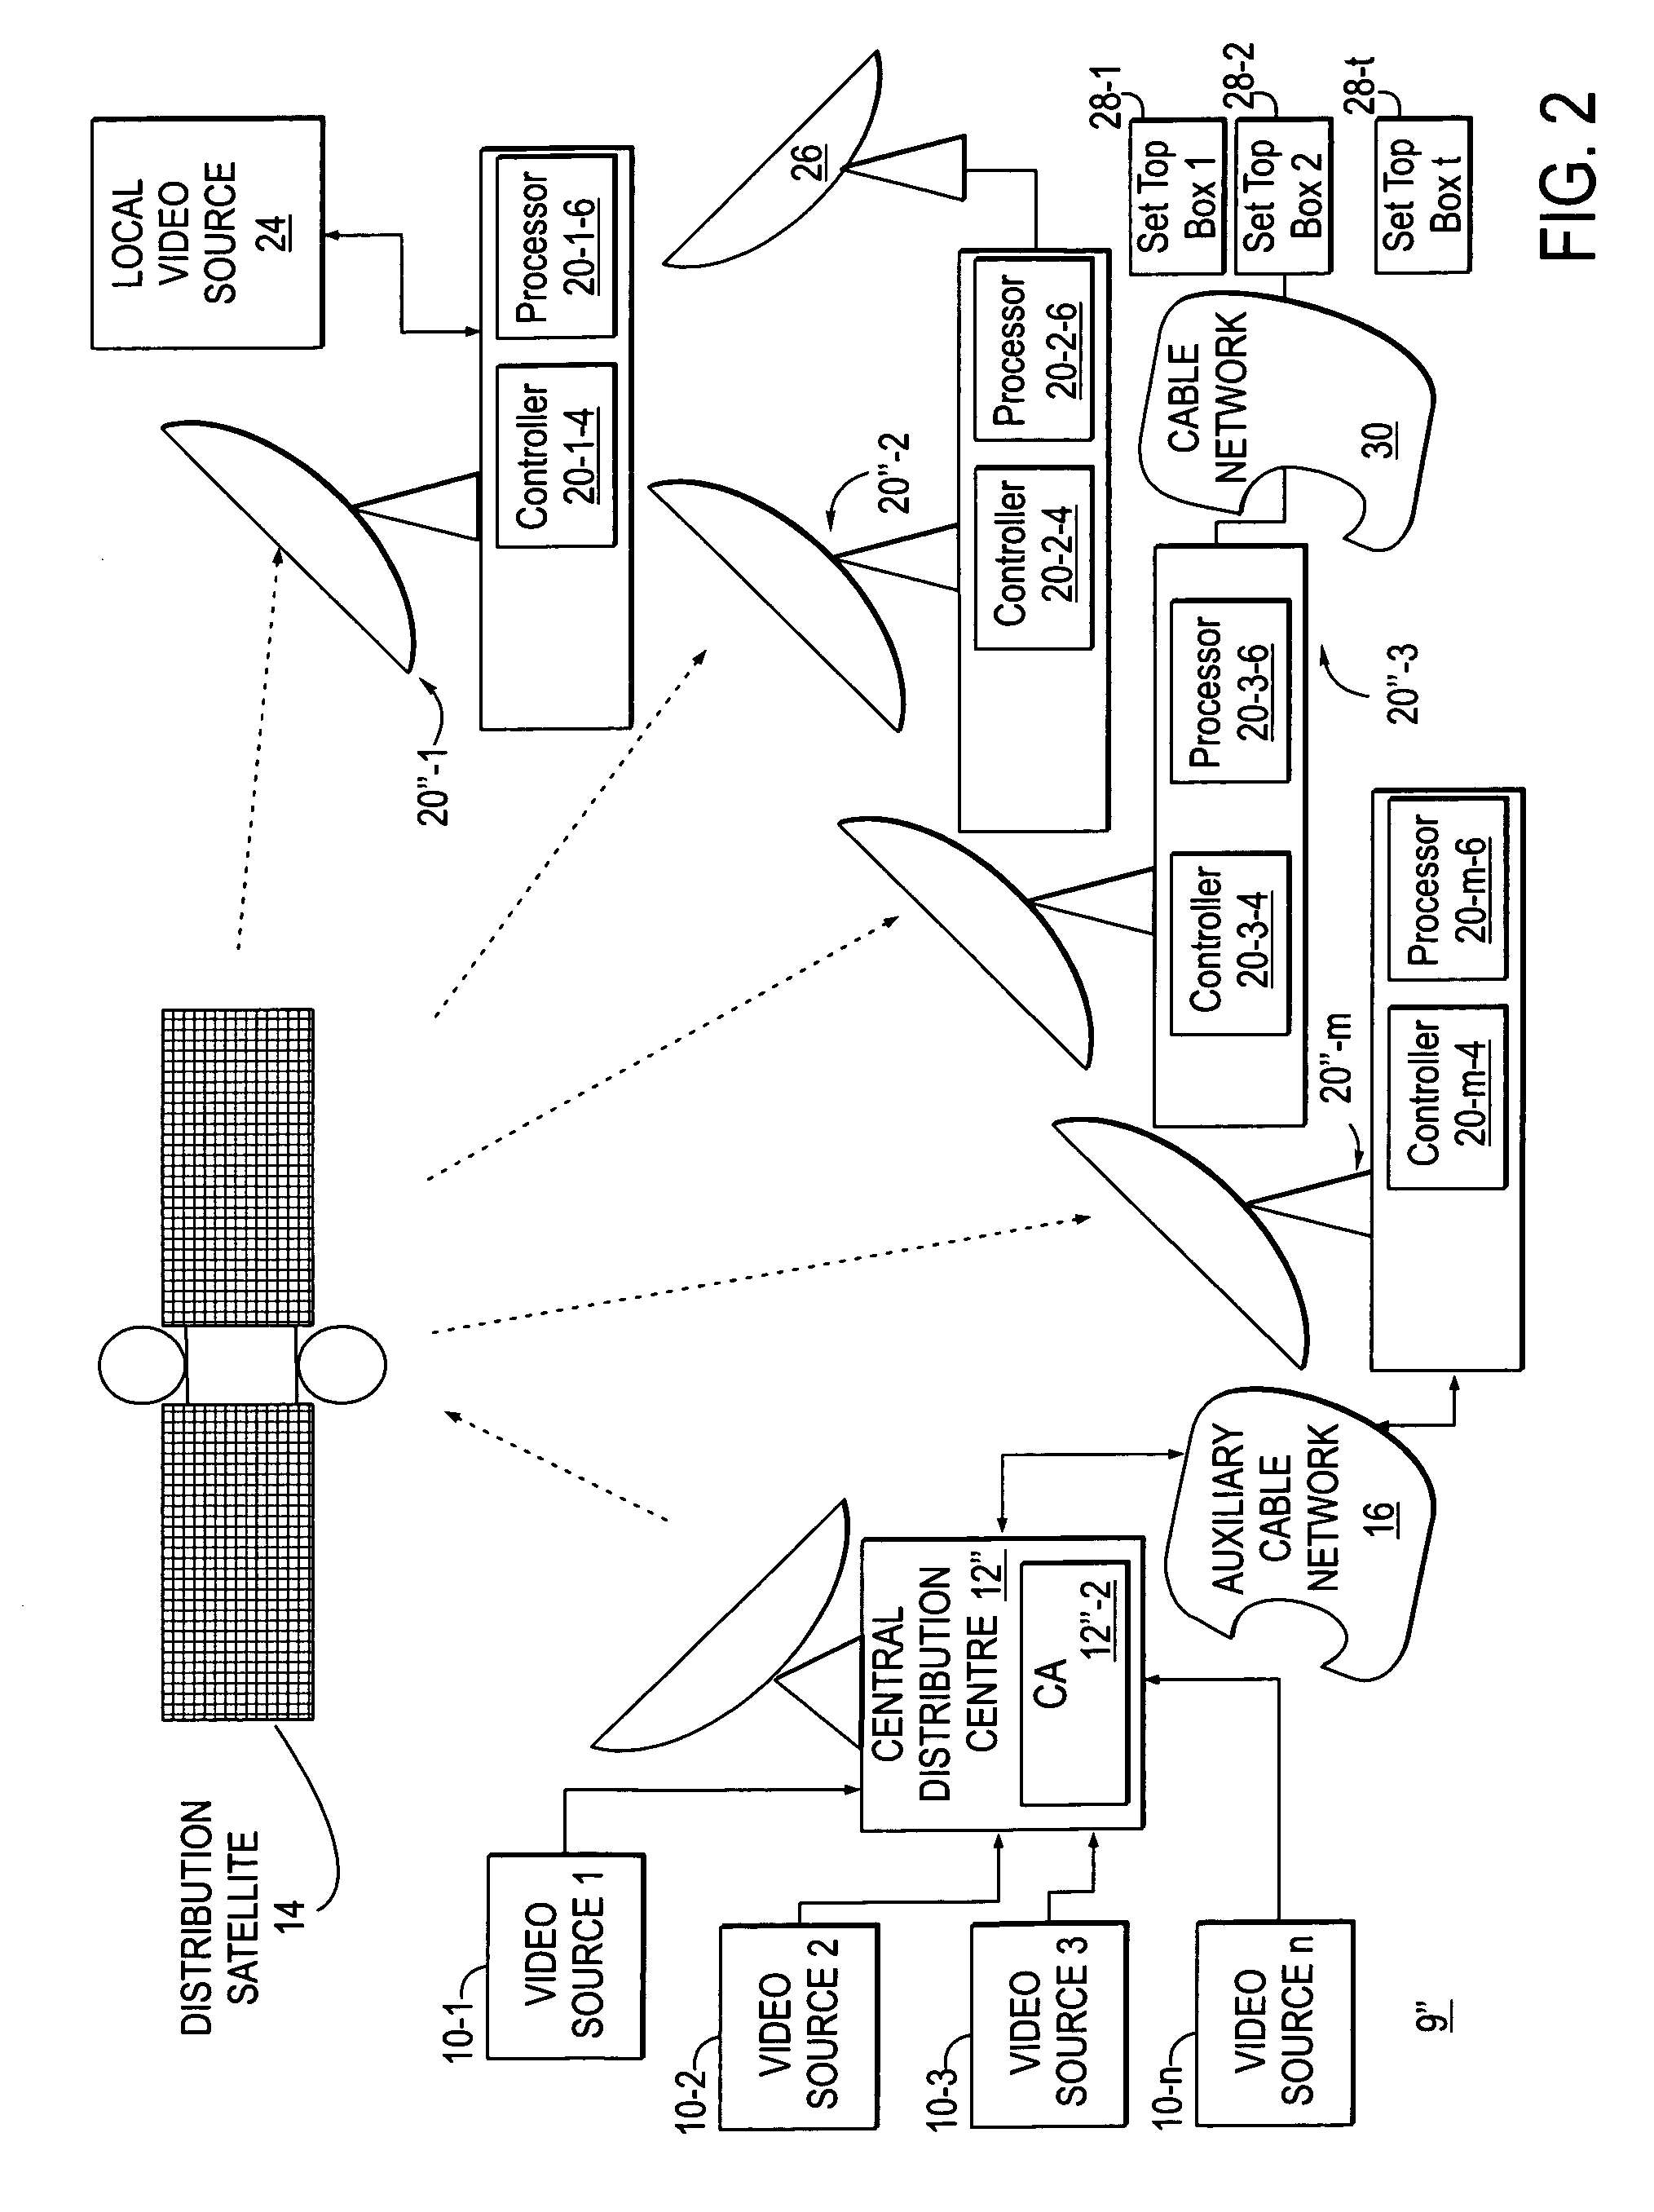 Method and system for generating, transmitting and utilizing bit rate conversion information